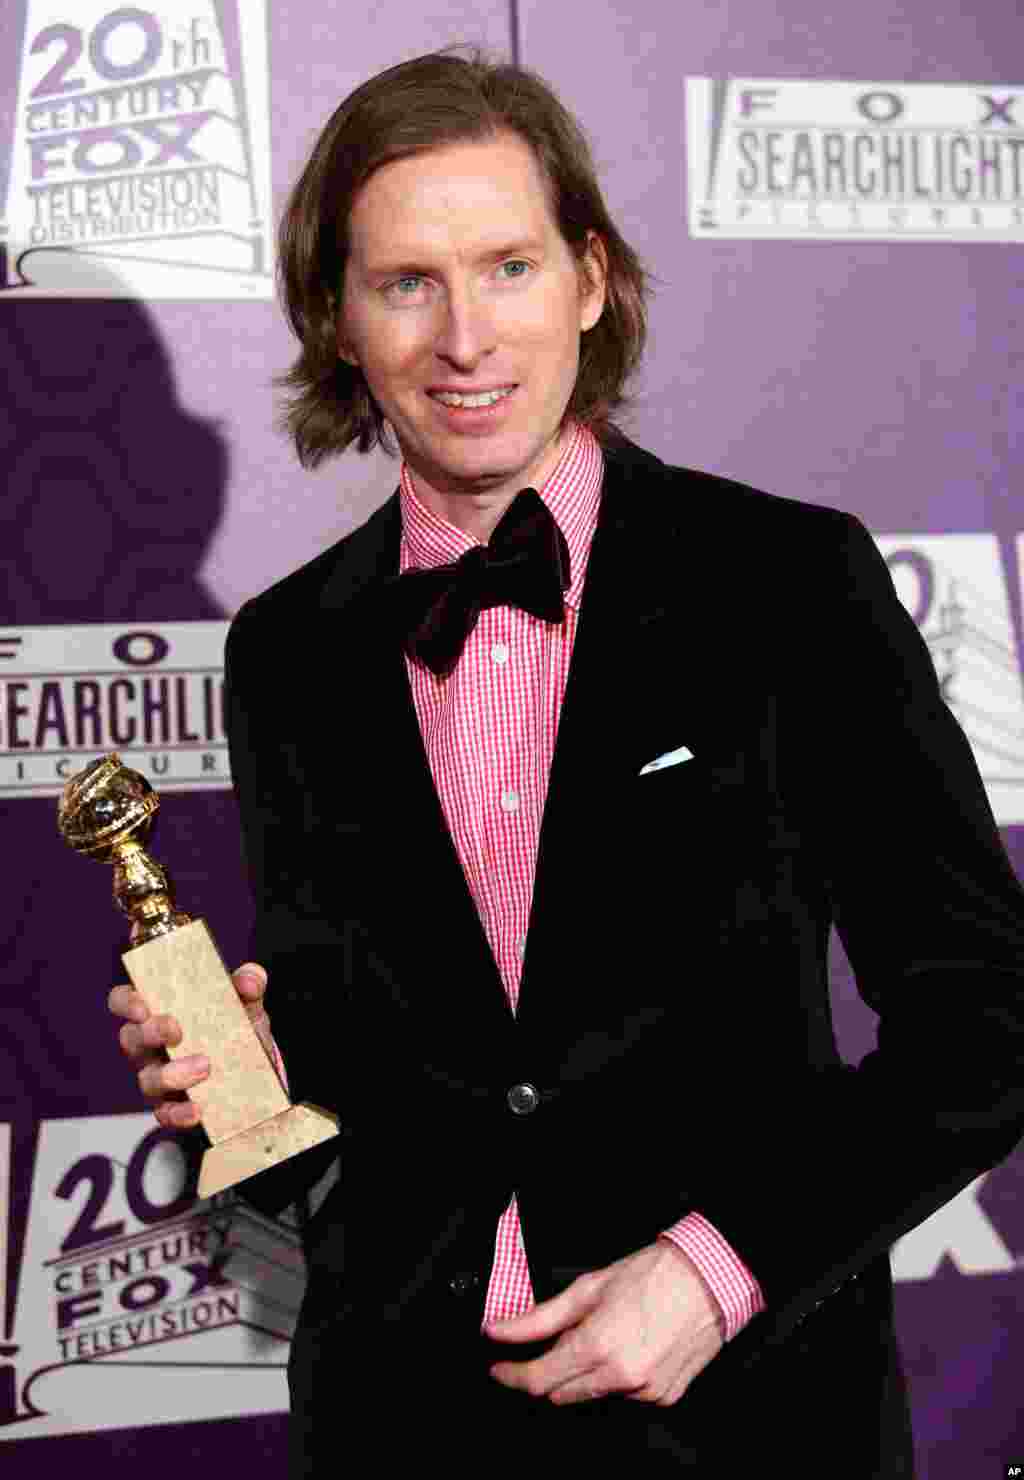 Wes Anderson, winner of best motion picture - comedy or musical for "The Grand Budapest Hotel", arrives at the Fox Searchlight Golden Globes afterparty at the Beverly Hilton Hotel, Jan. 11, 2015, in Beverly Hills, Calif.